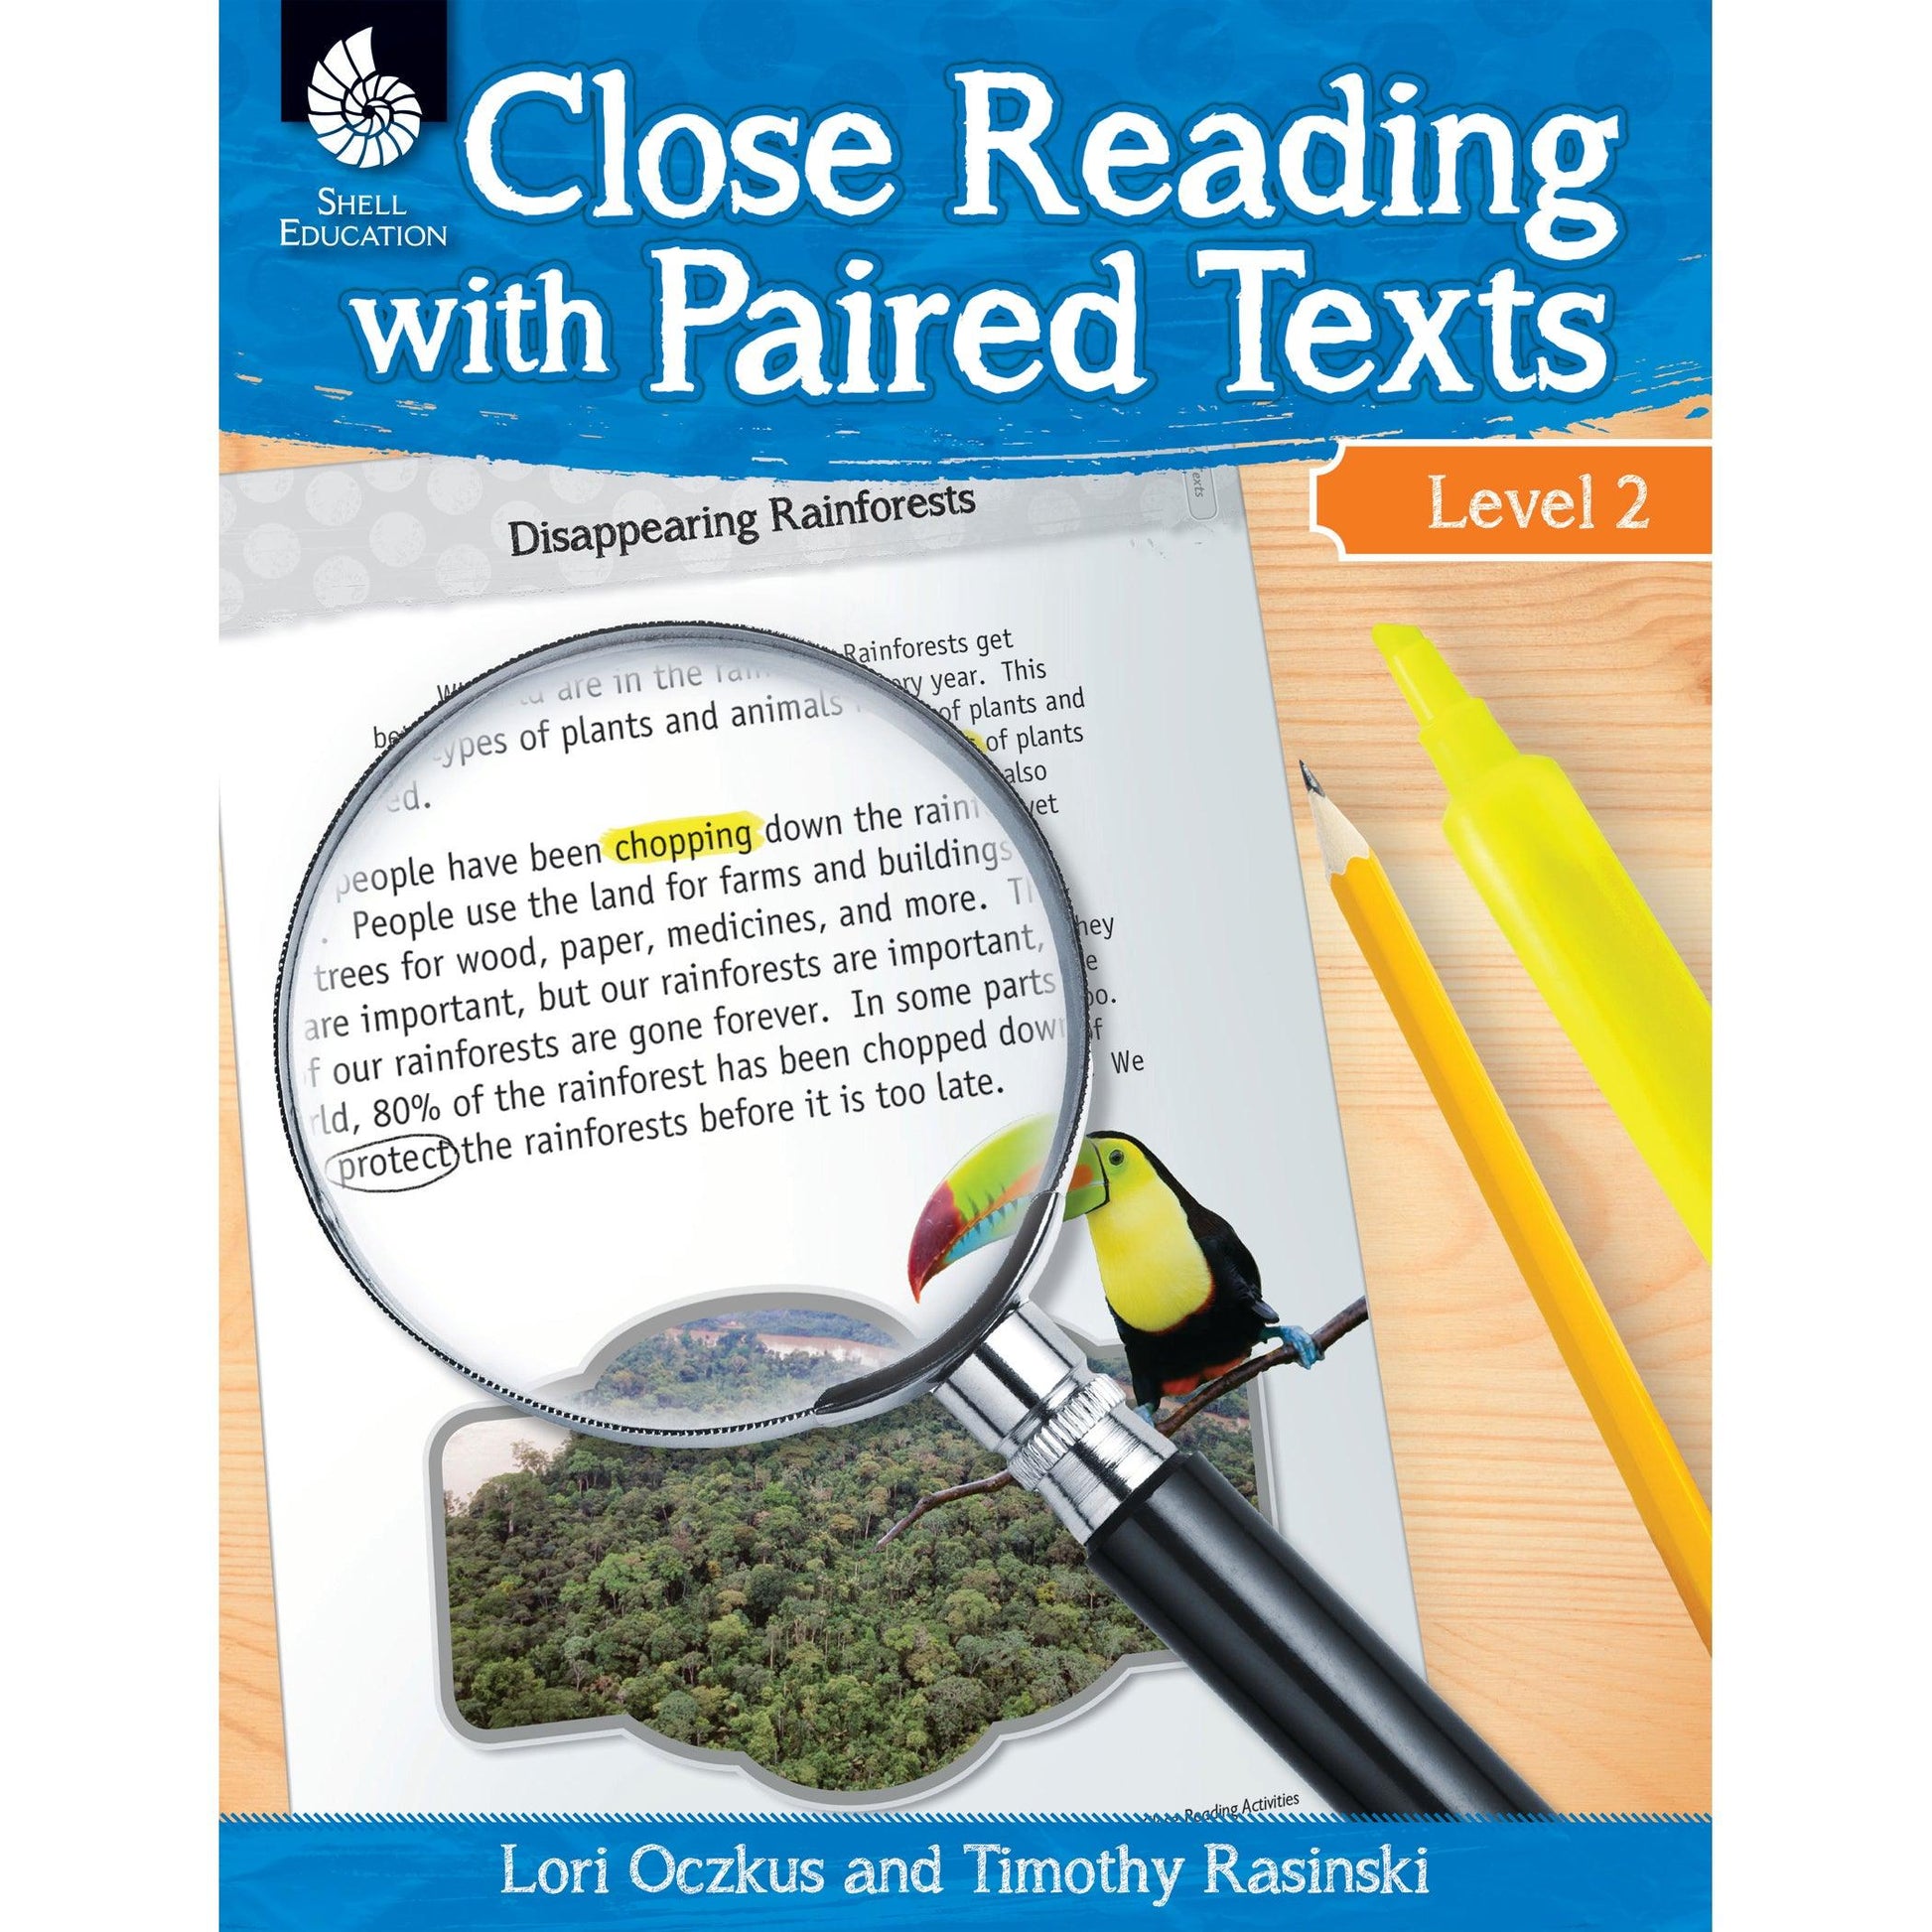 Close Reading with Paired Texts Book, Level 2 - Loomini